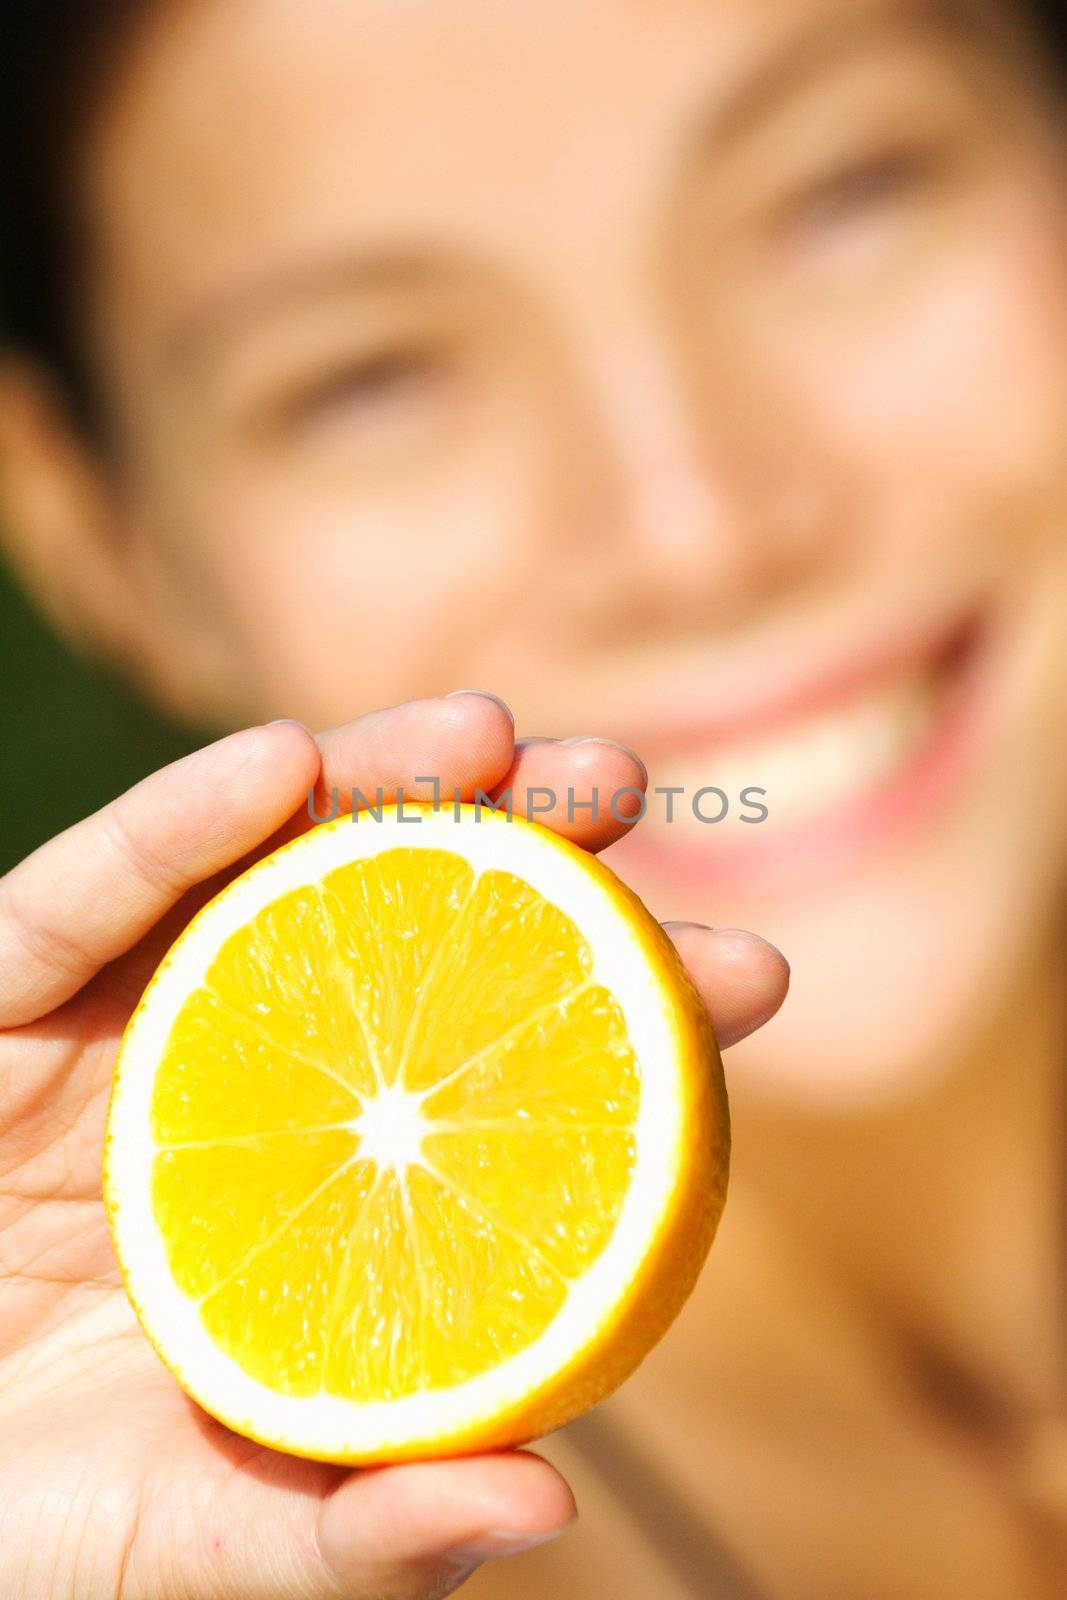 Health and orange concept. Asian woman smiling showing an orange.